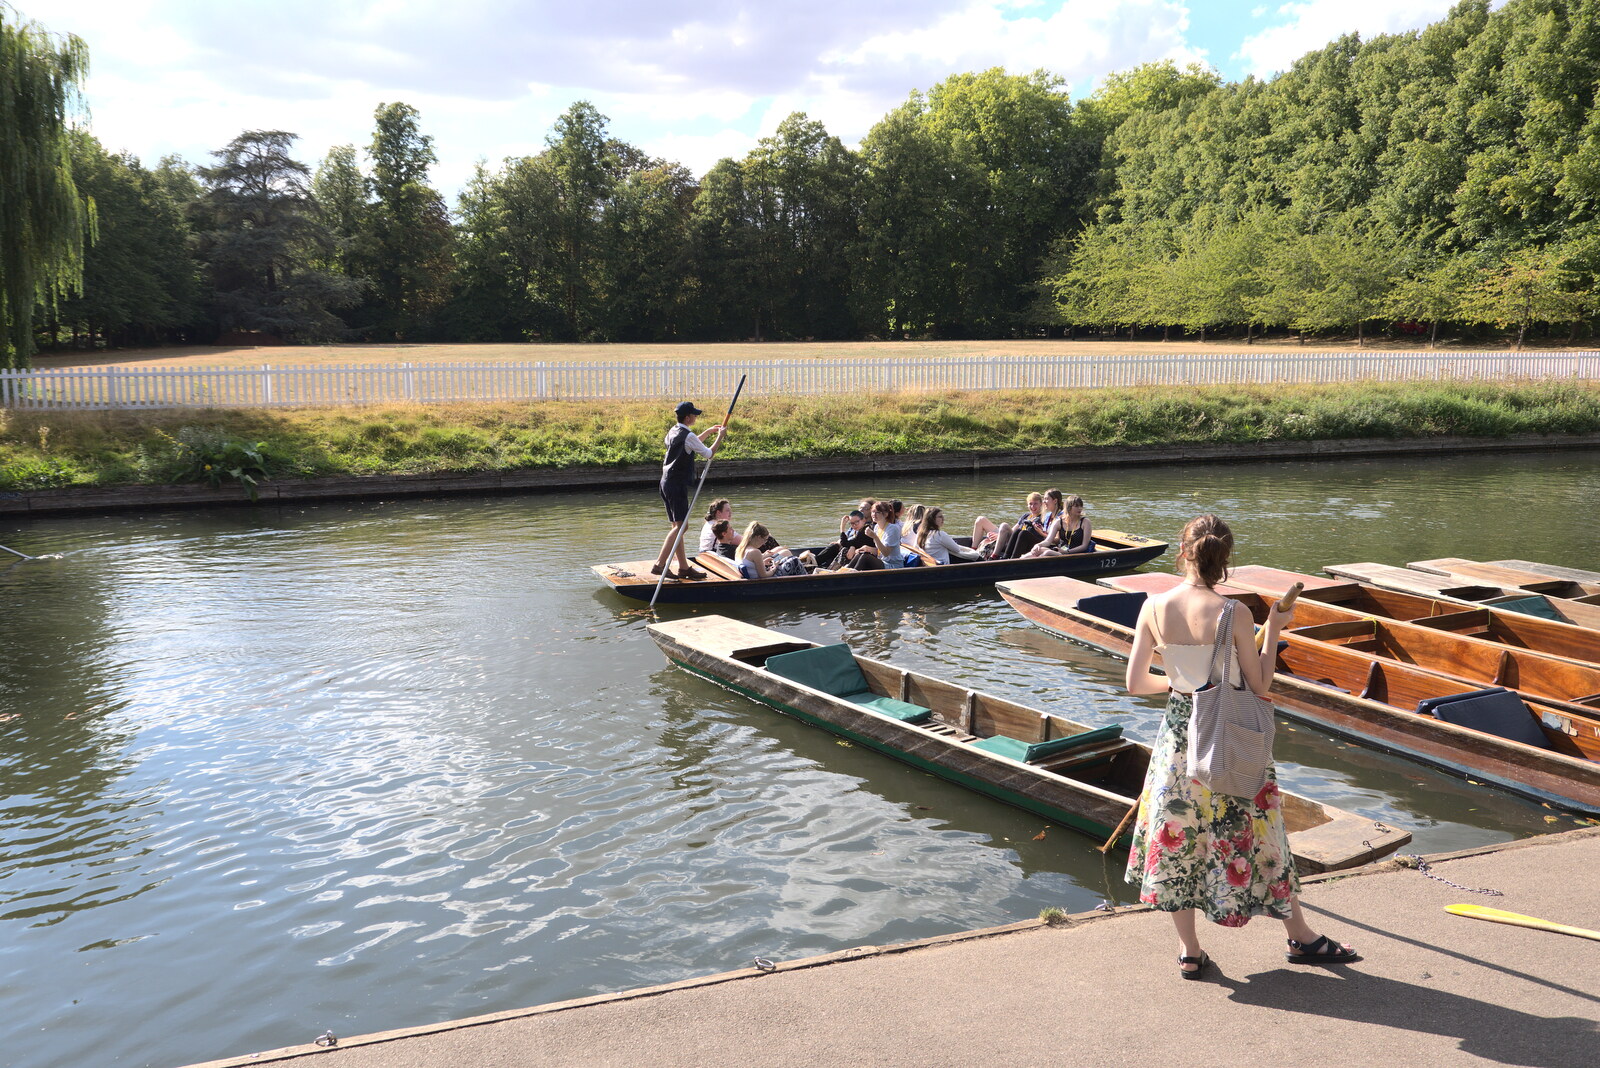 Punting on the Cam from Anglesey Abbey and a #StandWithUkraine Demo, Cambridge - 24th August 2022